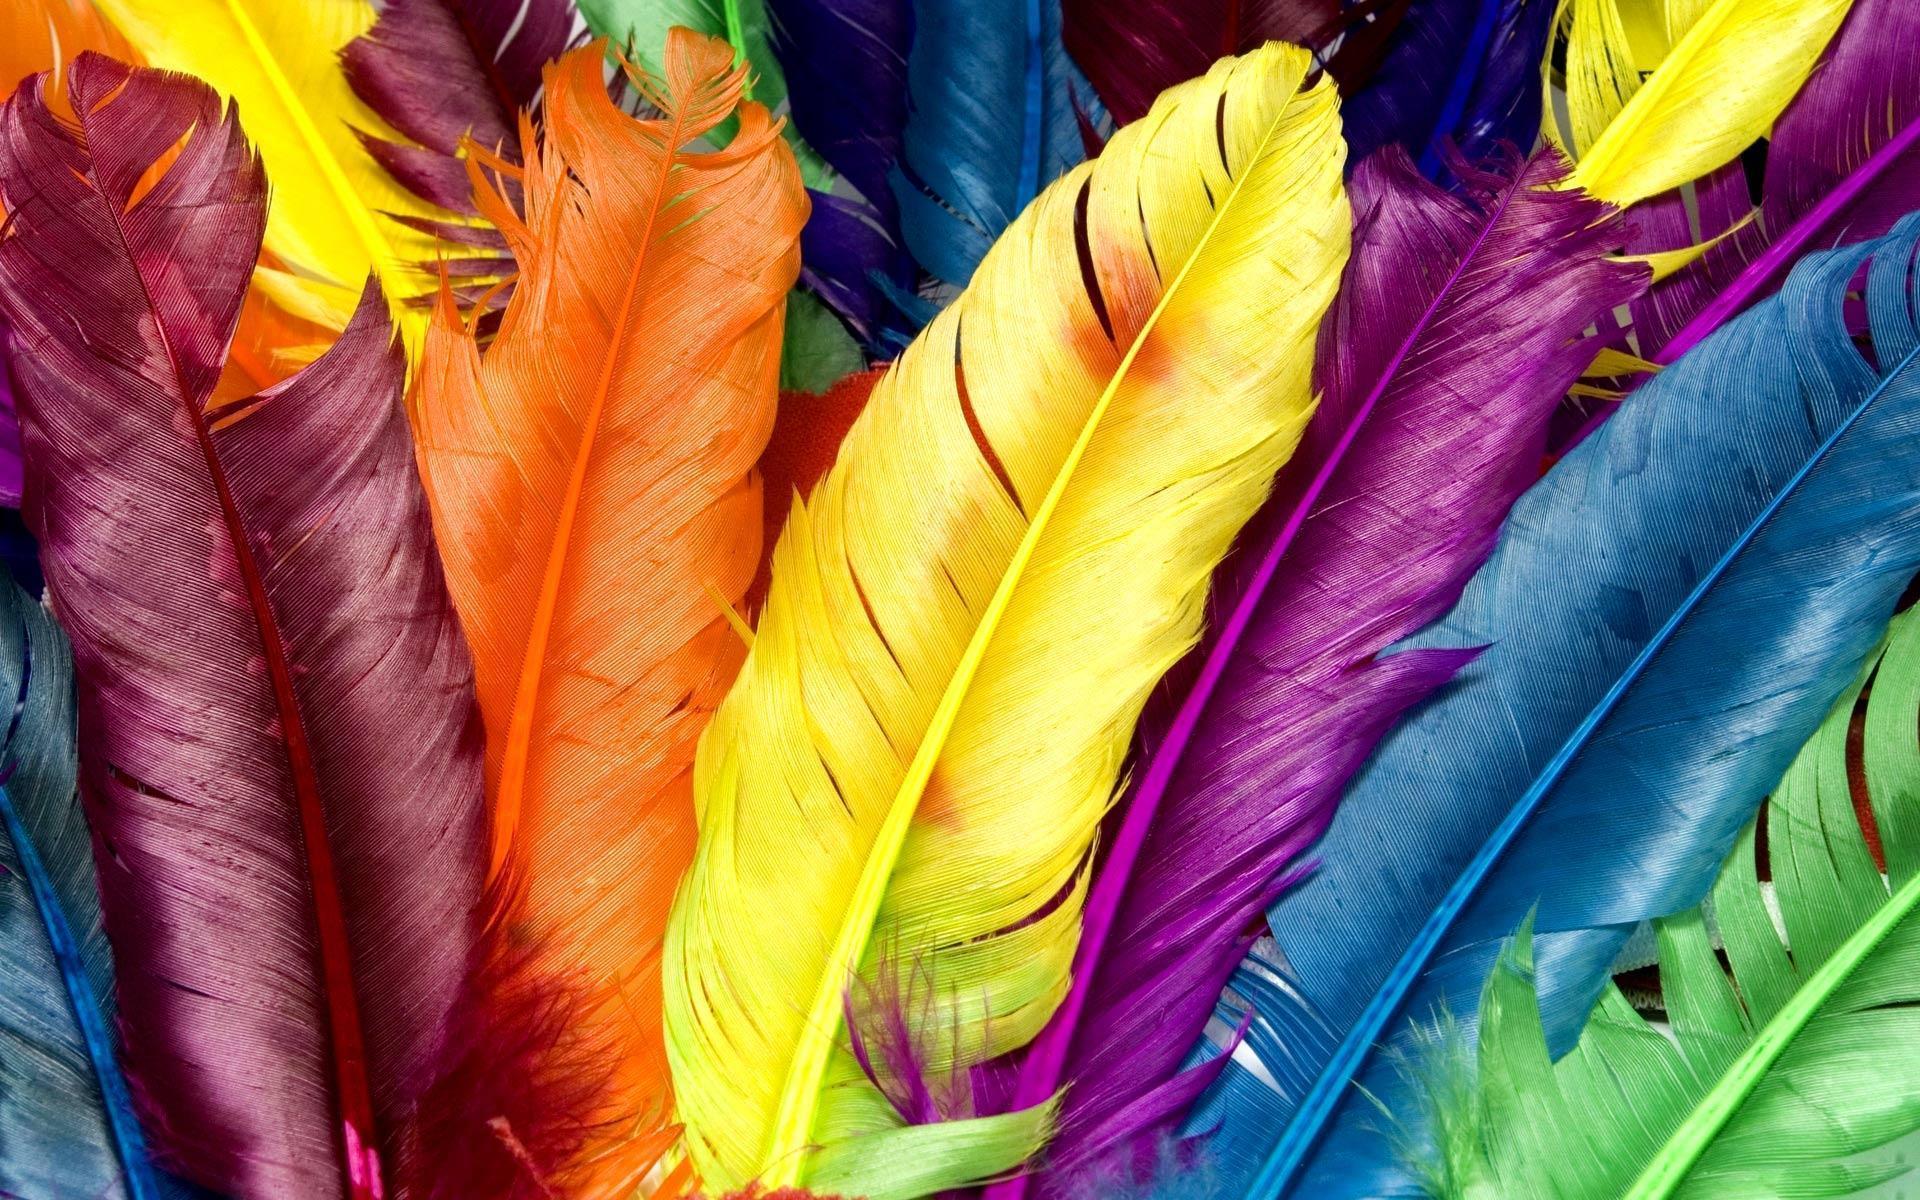 Desktop Wallpaper · Gallery · Computers · Colored feathers. Free